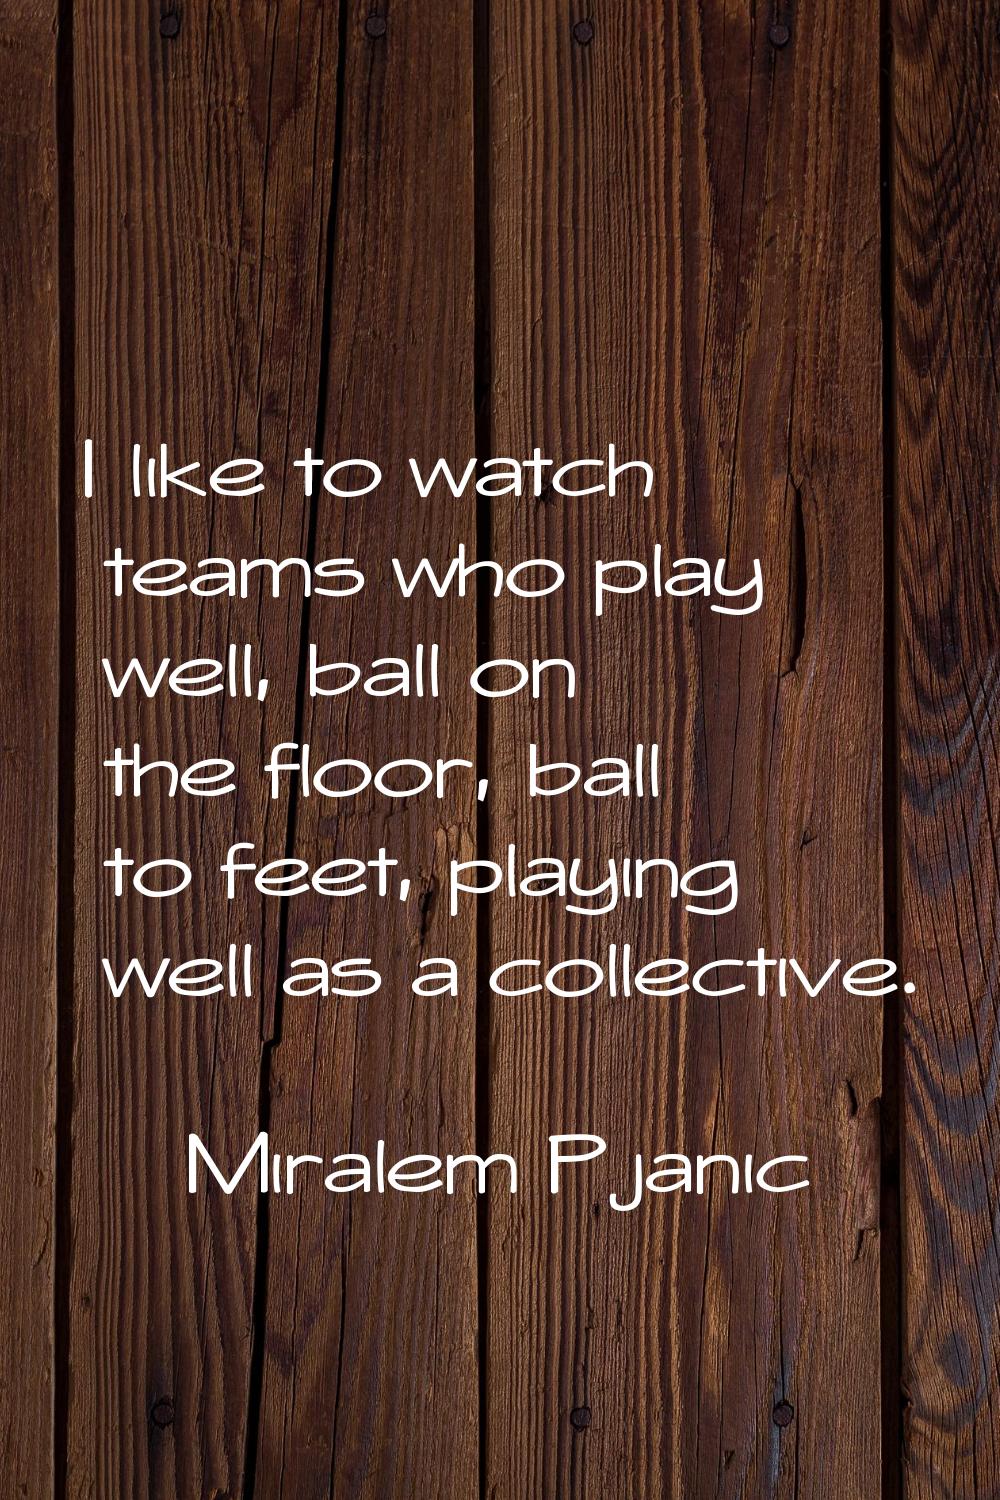 I like to watch teams who play well, ball on the floor, ball to feet, playing well as a collective.